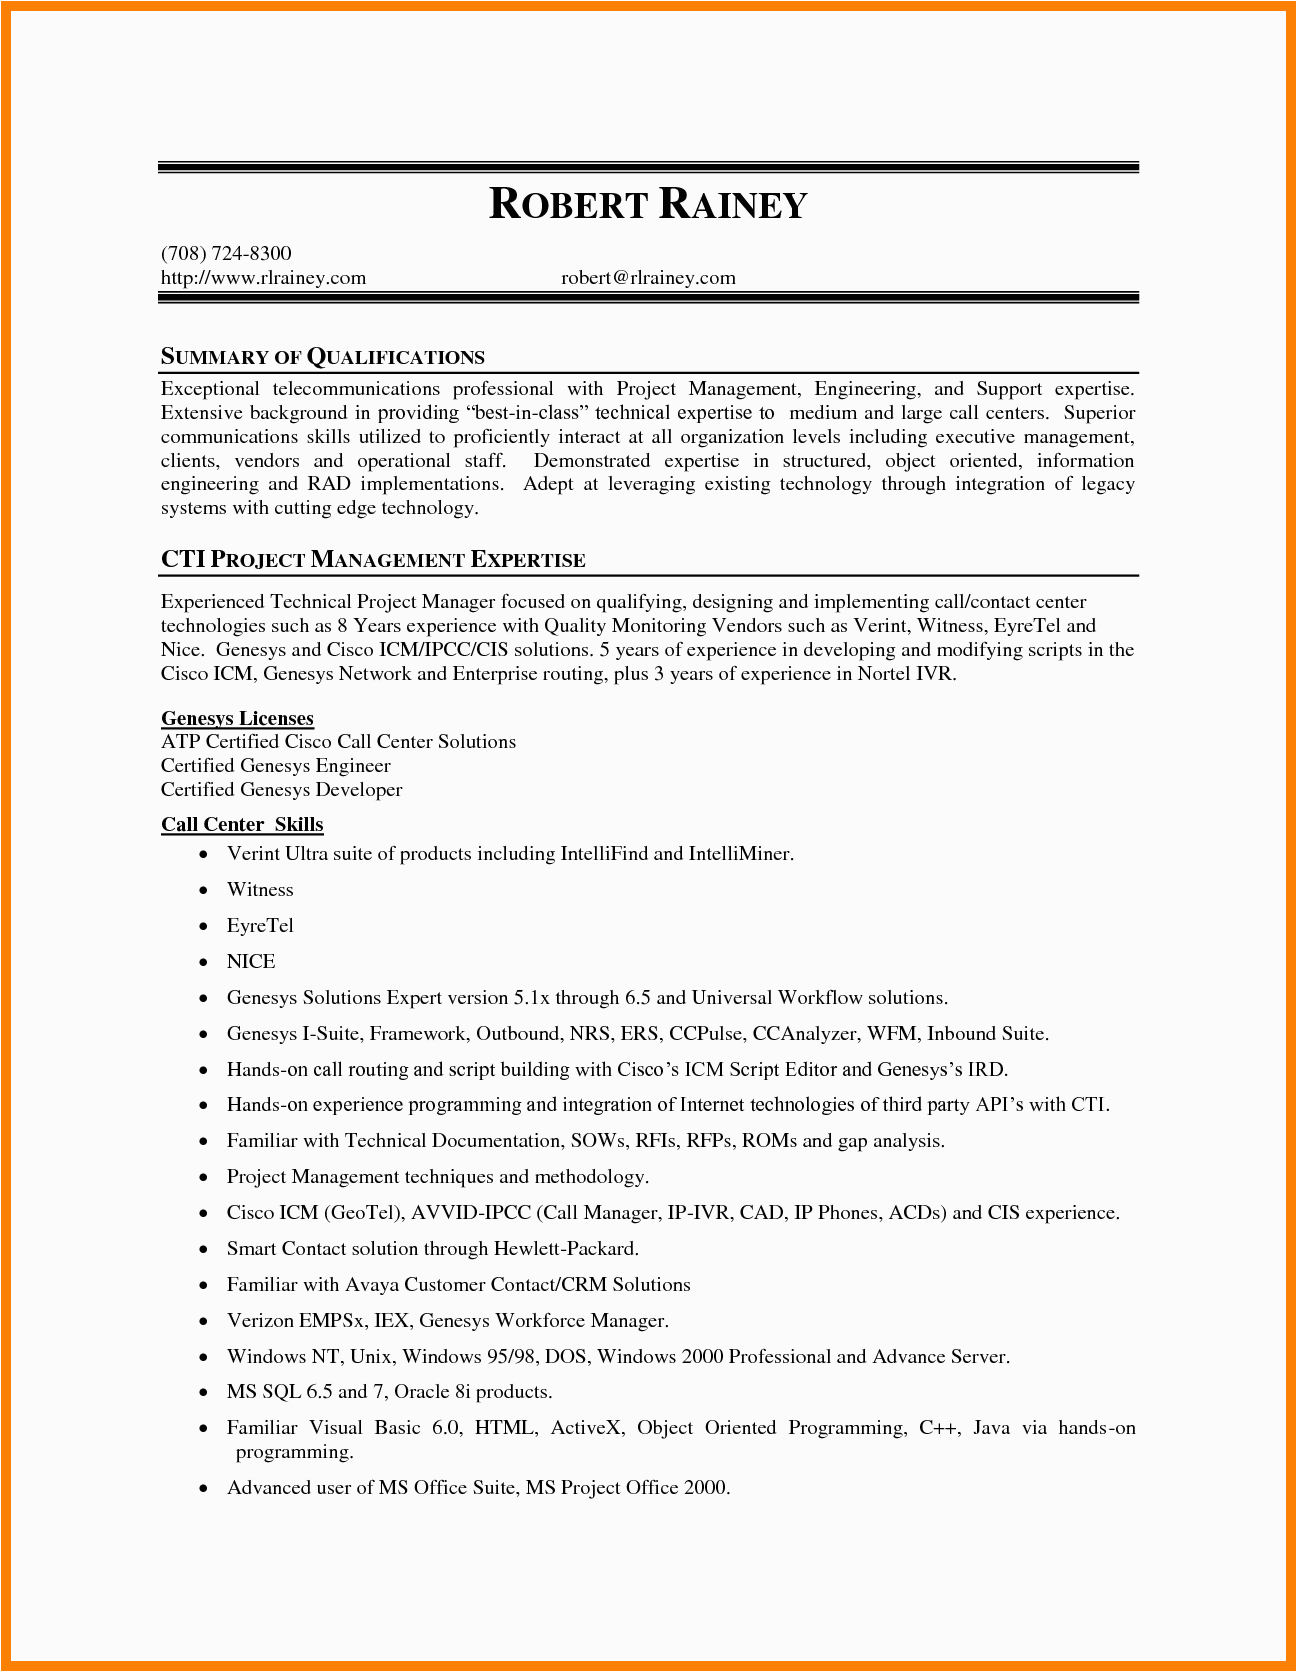 Sample Skills and Qualifications In Resume 7 Summary Of Qualifications for Resume Ledger Review